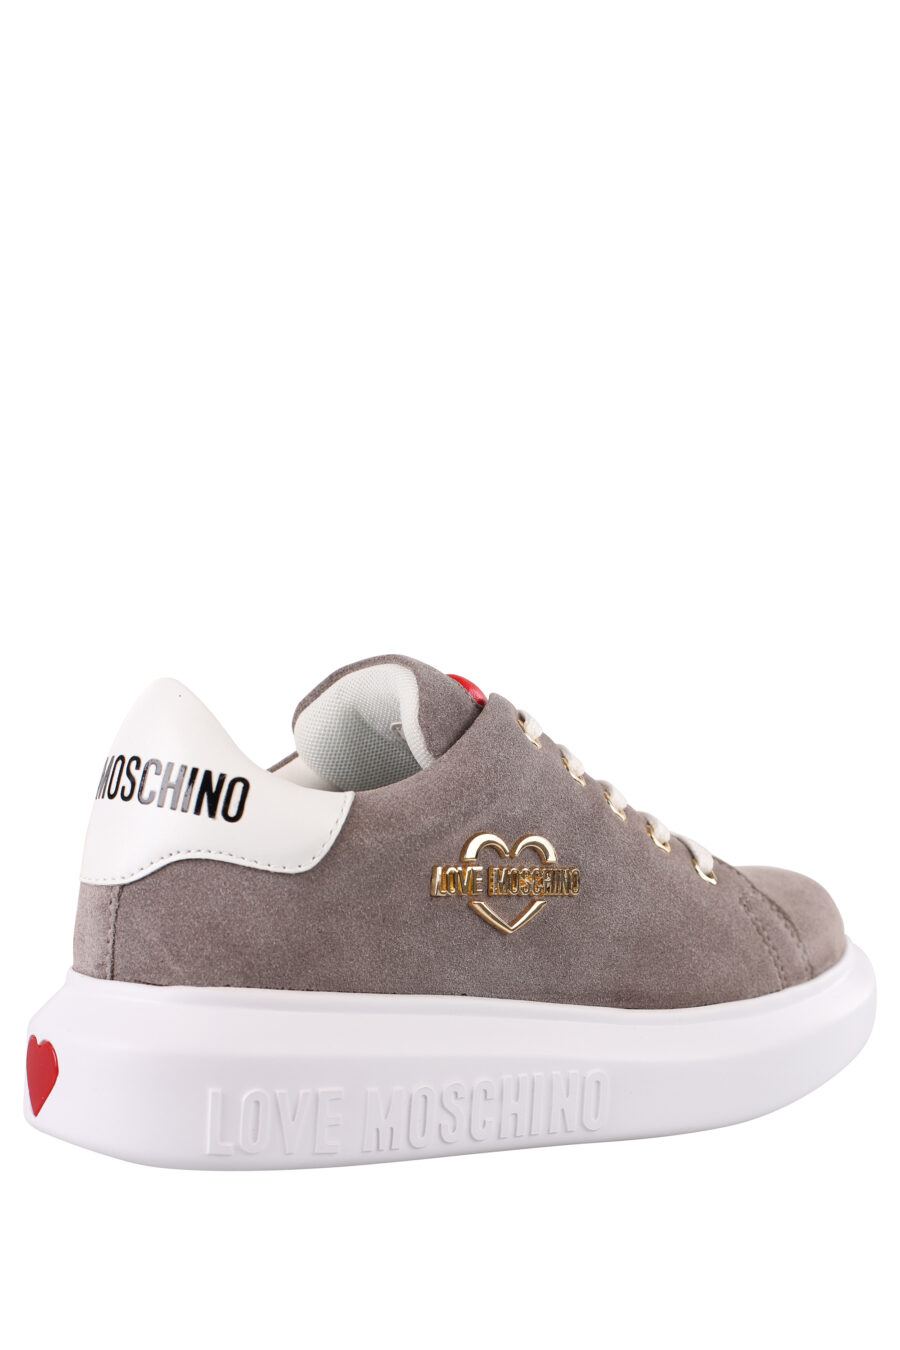 Grey trainers with gold metal logo and white sole - IMG 1181